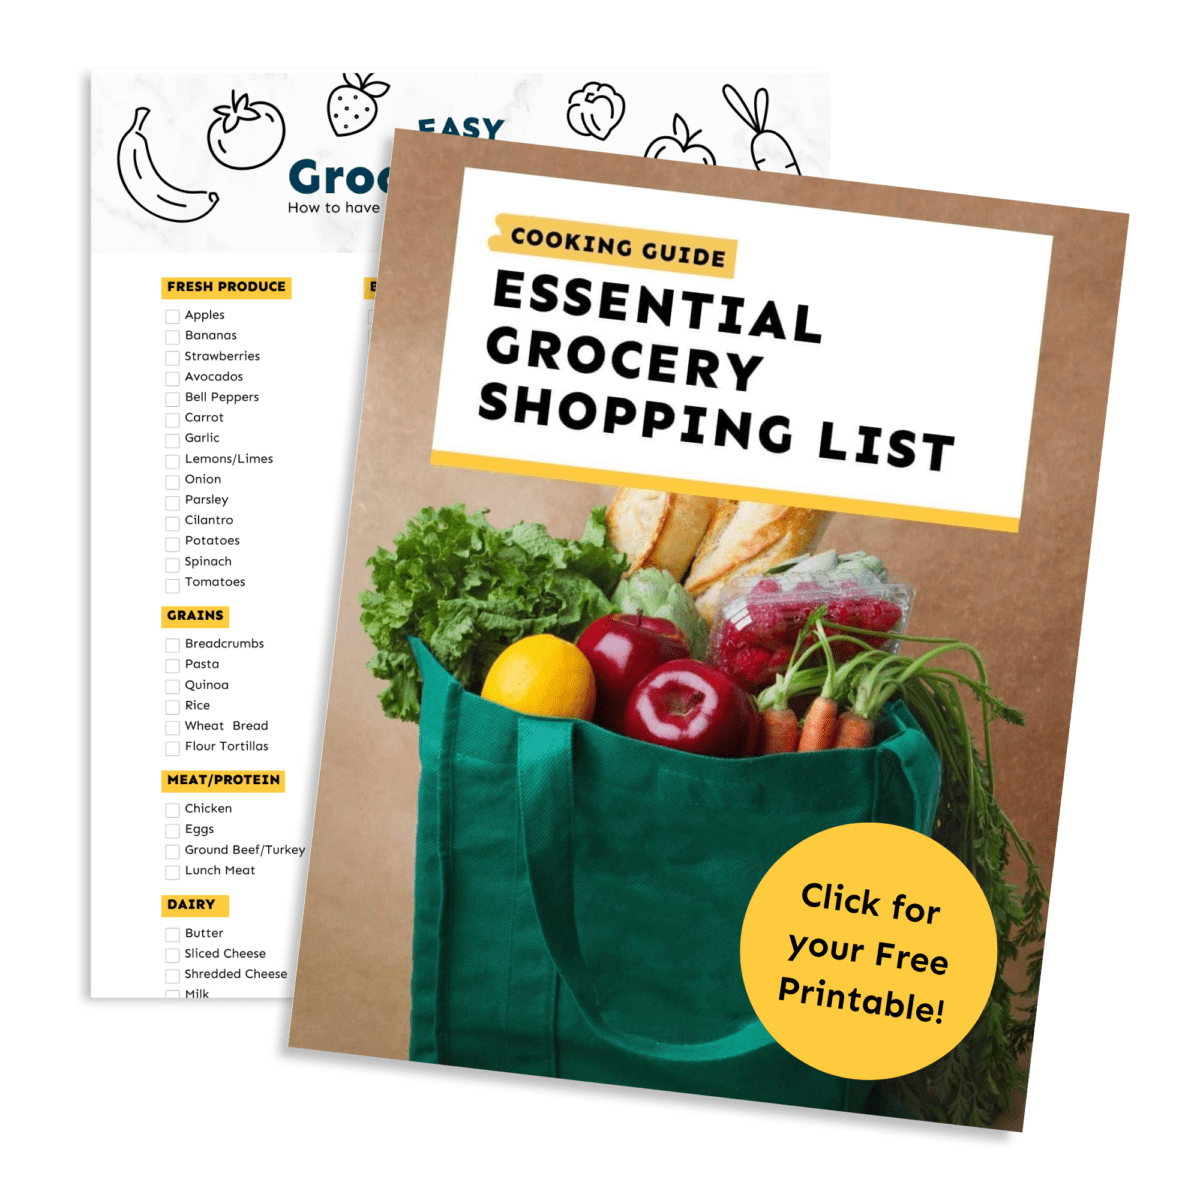 https://www.thecookierookie.com/wp-content/uploads/2017/07/grocery-list-1200x1200.png